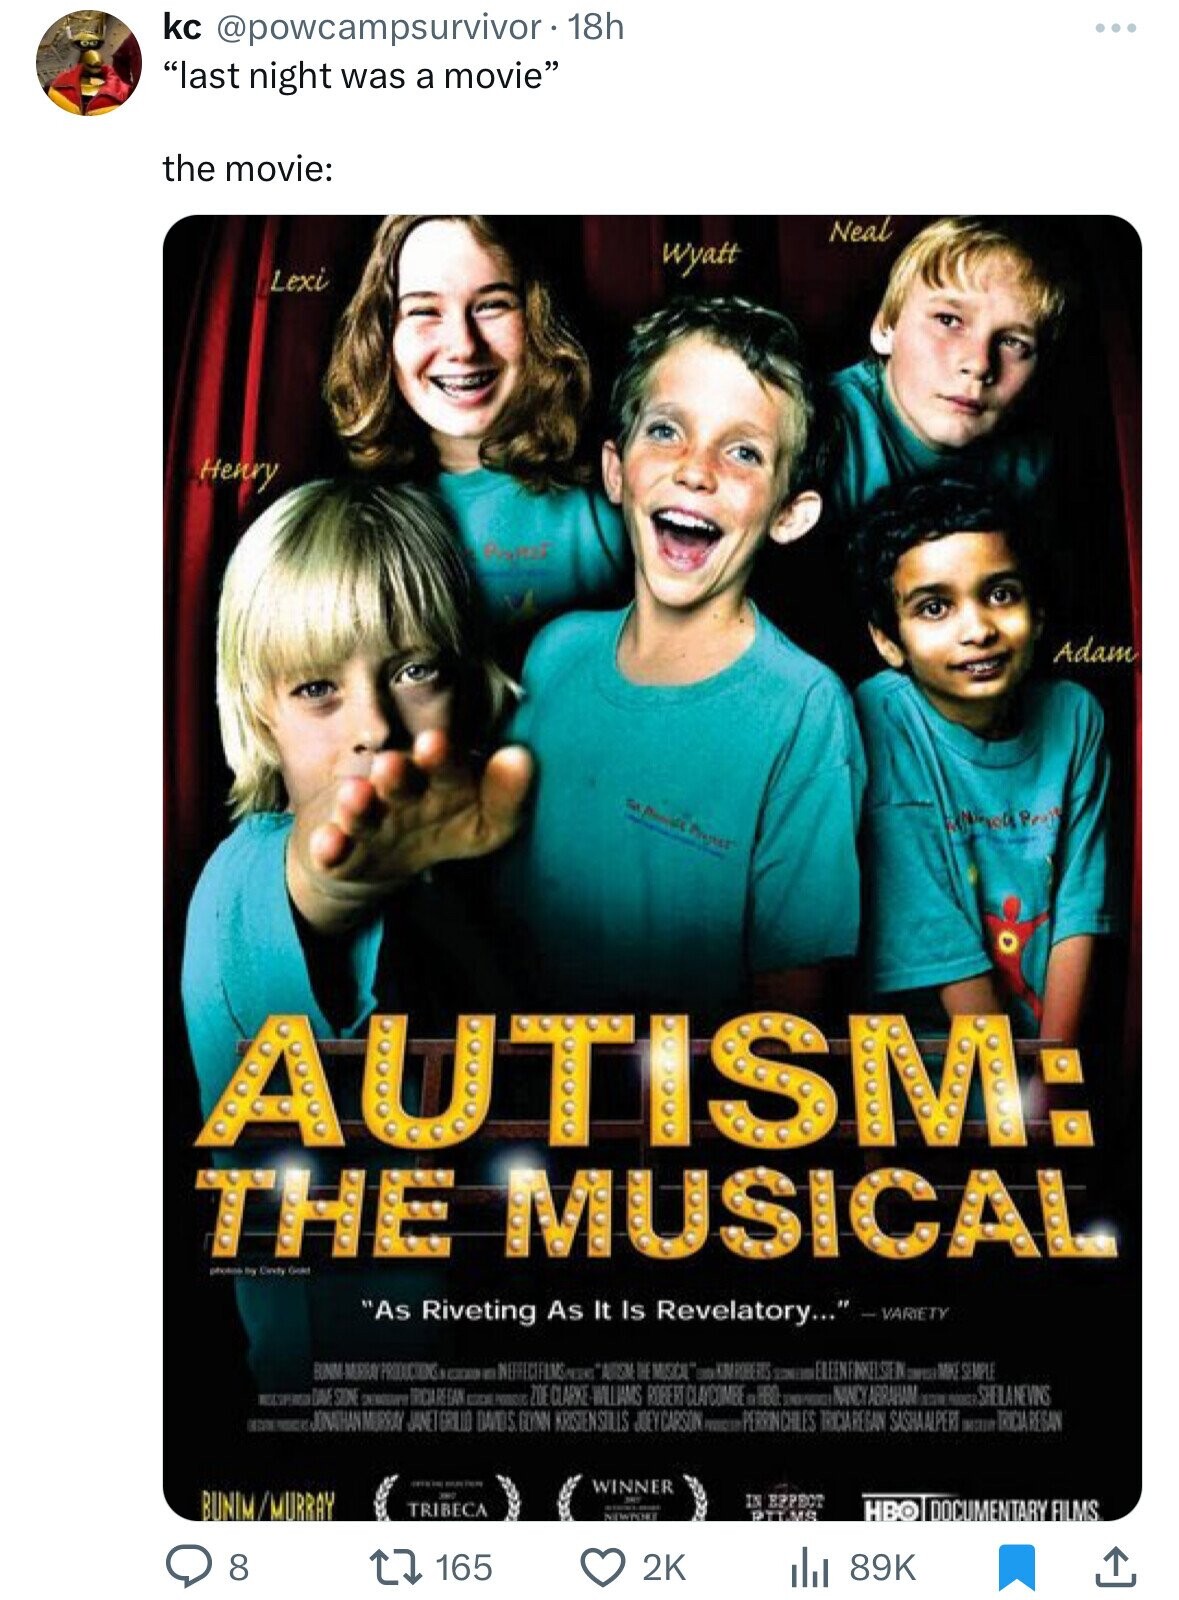 autism musical - kc . 18h "last night was a movie" the movie Lexi Henry Neal Wyatt Pr Proj Adam Autism The Musical ph by City Go "As Riveting As It Is Revelatory..." Variety Bunm Murray Productions Nefectifims The Musical Same Stone Triciare Ganze Clarke 